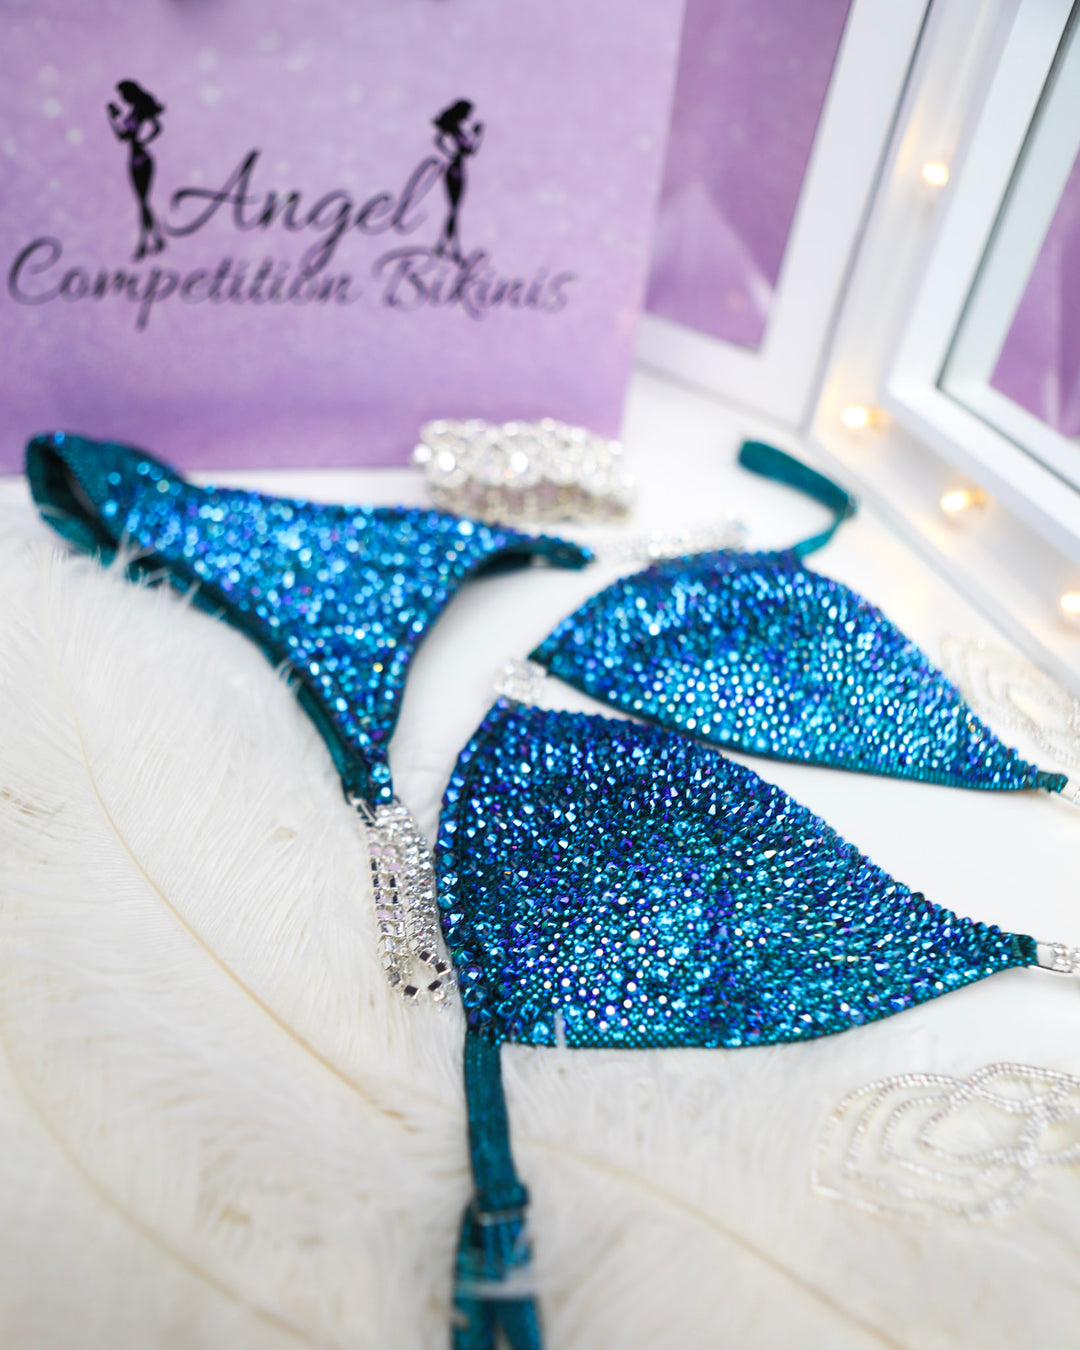 Introducing Jennifer's Teal Radiance competition suit! 💎 Sparkling teal adorned with confidence, designed to shine on stage like never before. Elevate your performance with Jennifer Capozzi's signature style! #ShineBright #ConfidenceBoost #StageGoddess 💪🌟